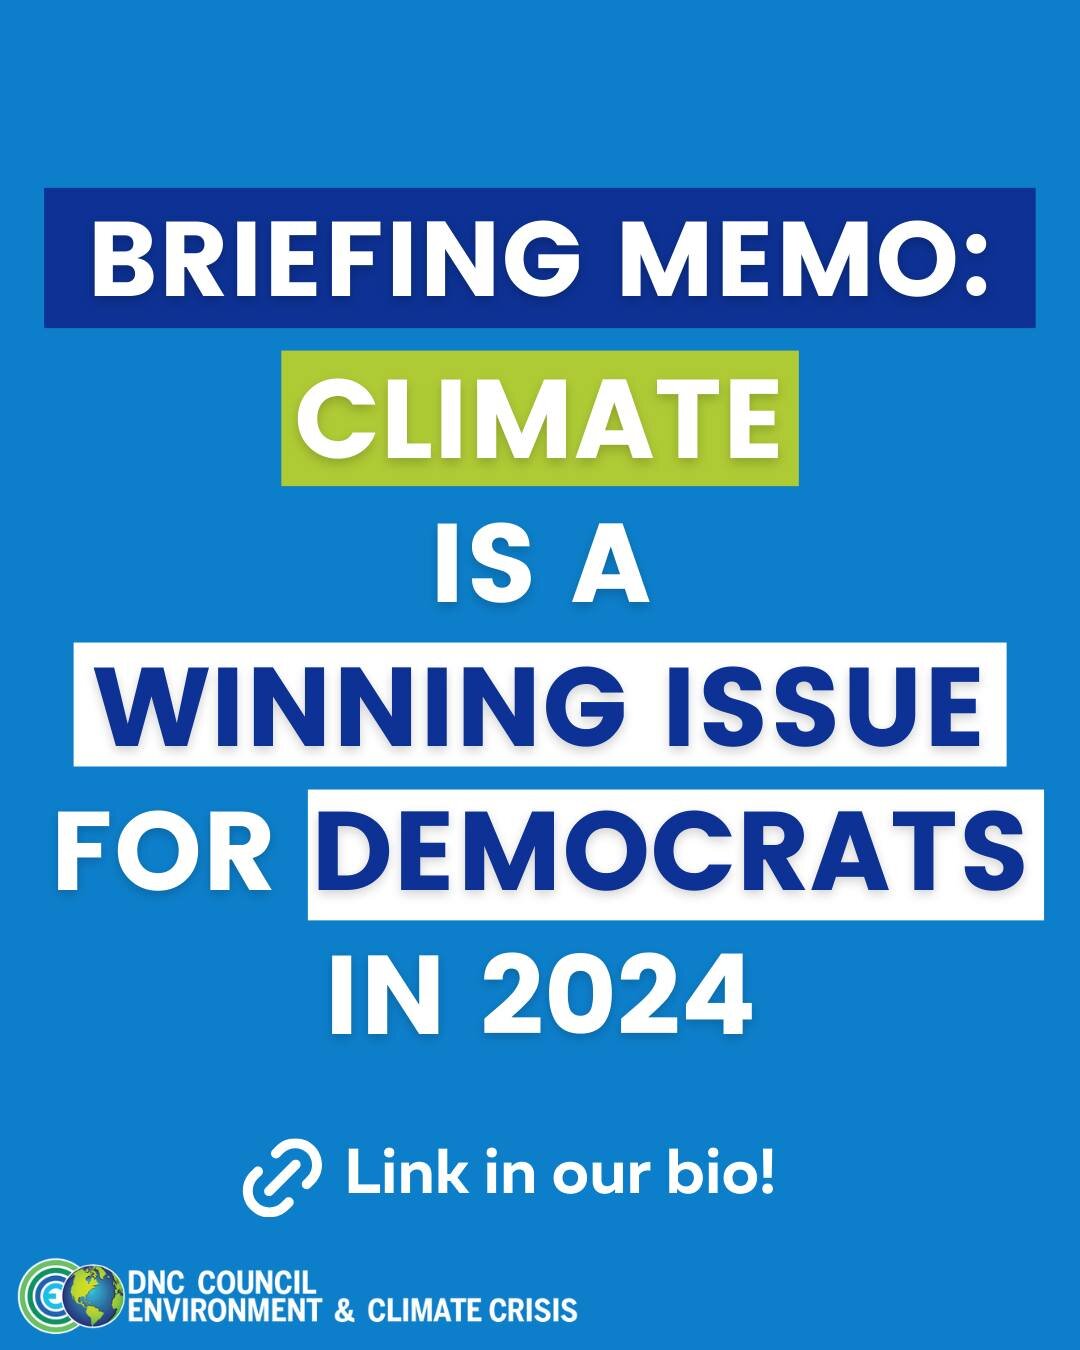 Voters want Democrats to run on climate! Here are the facts:

🌎 Climate is a kitchen table issue: 50% of voters have experienced climate change impacts
🌎 Climate is key to young voters and older voters
🌎 Much more

Read the full memo at the link i